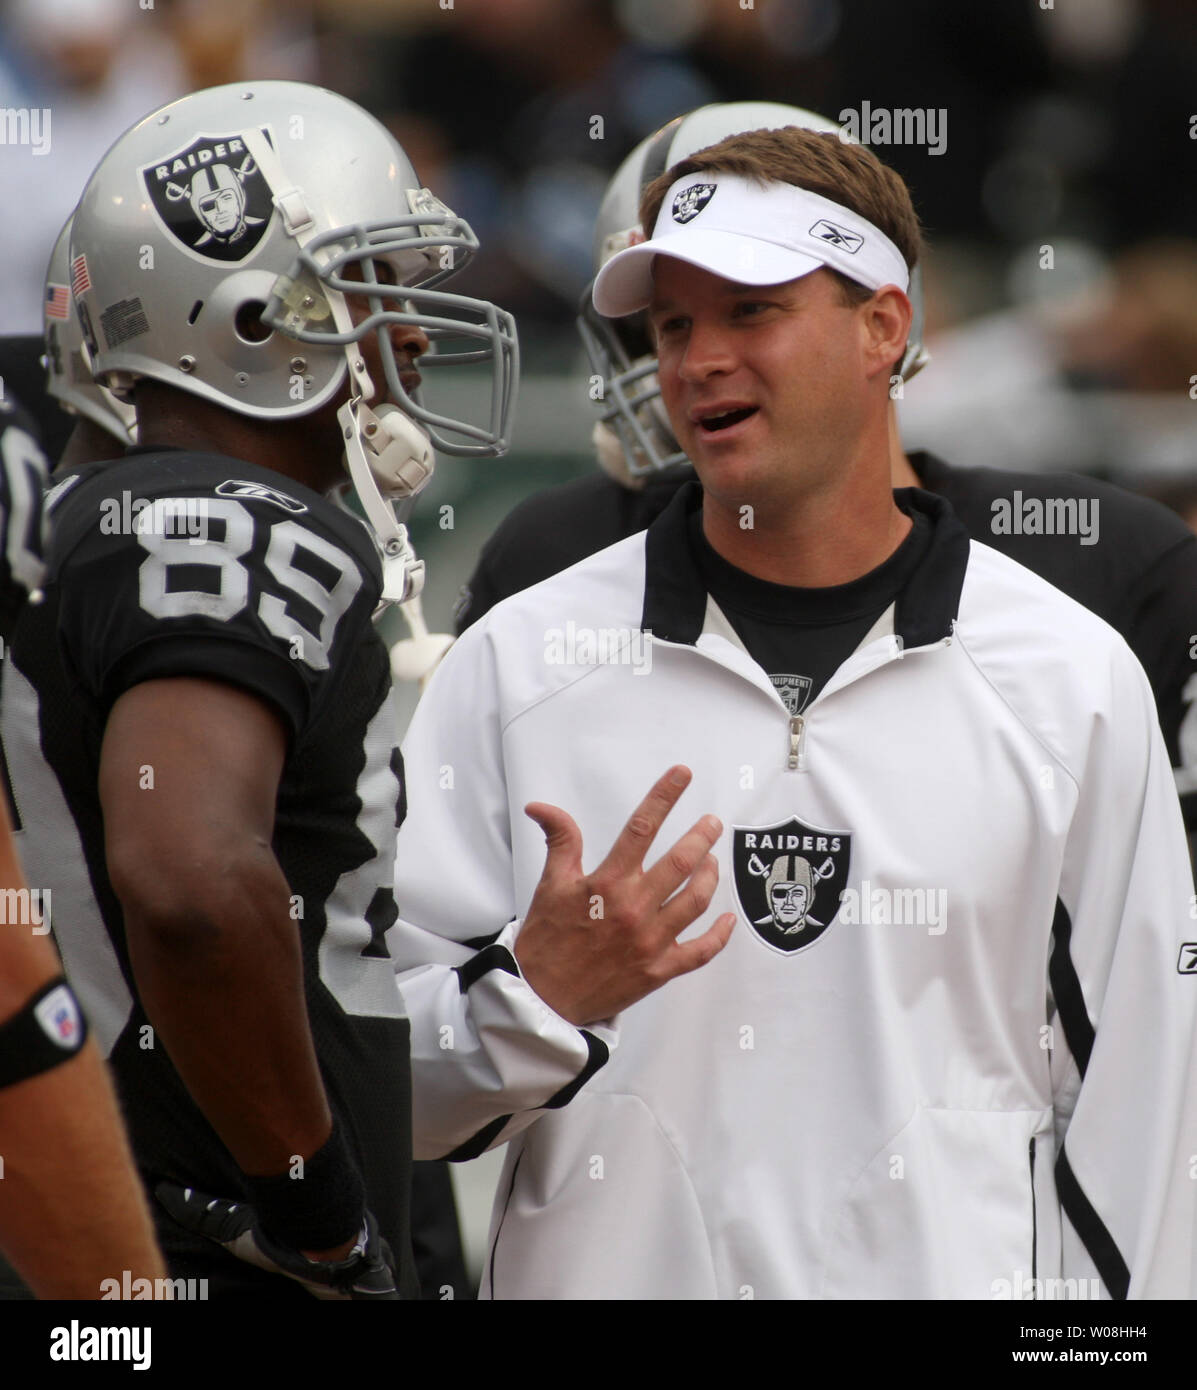 Oakland Raiders Head Coach Lane Kiffin talks with wide receiver Ronald Curry (89) before play against the Detroit Lions at McAfee Coliseum in Oakland, California on September 9, 2007. The Lions defeated the Raiders 36-21.   (UPI Photo/Terry Schmitt) Stock Photo